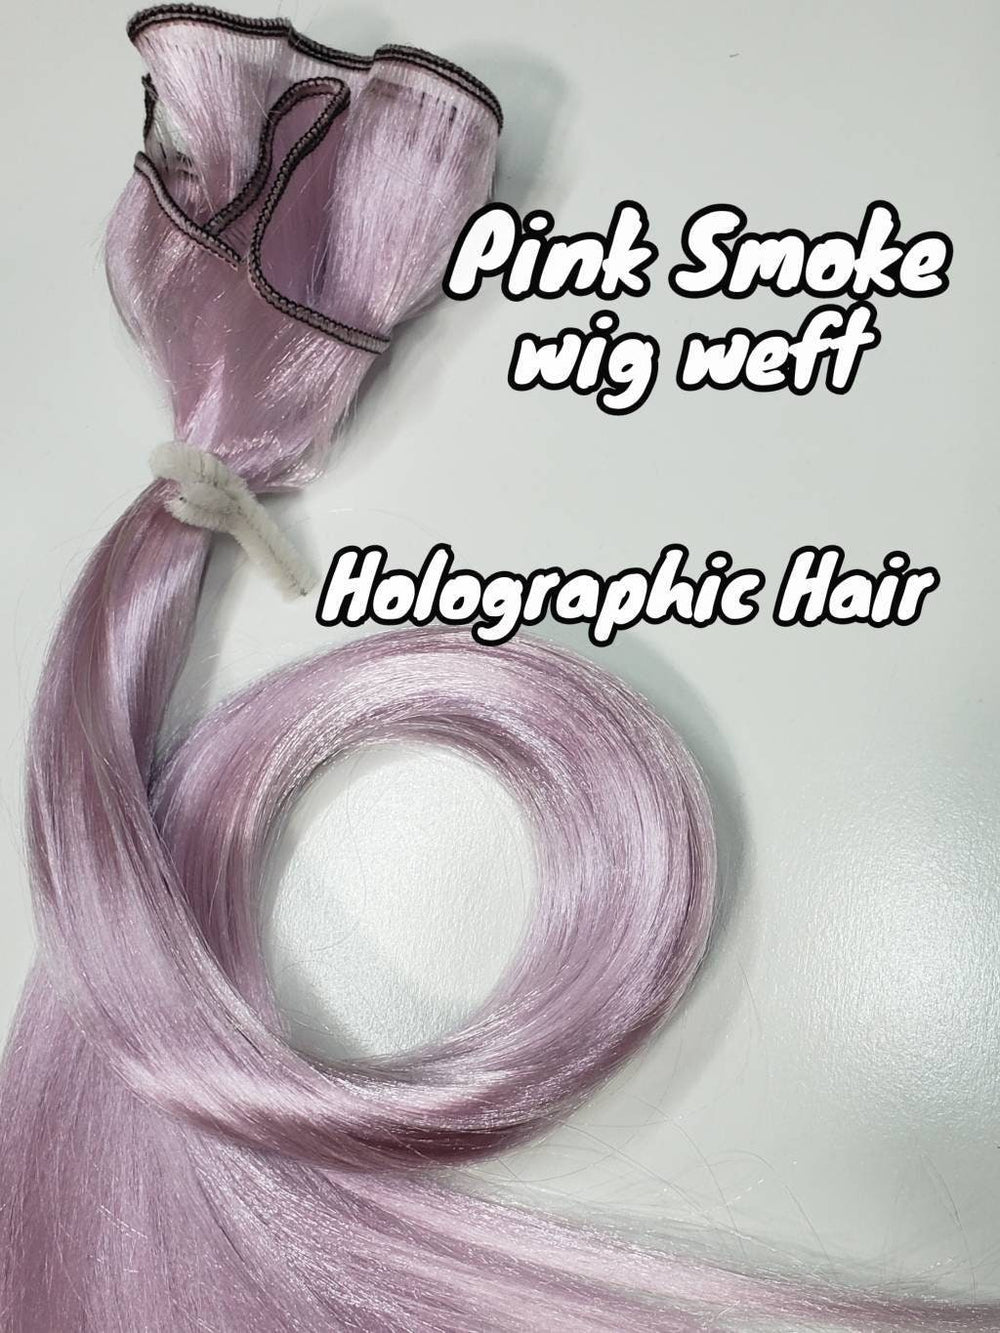 DG-HQ™ Wig Weft Nylon Pink Smoke NC105B Holographic Nylon Weft 30"Wx20"L Doll Hair for Making Fashion Doll Wigs Standard Temperature